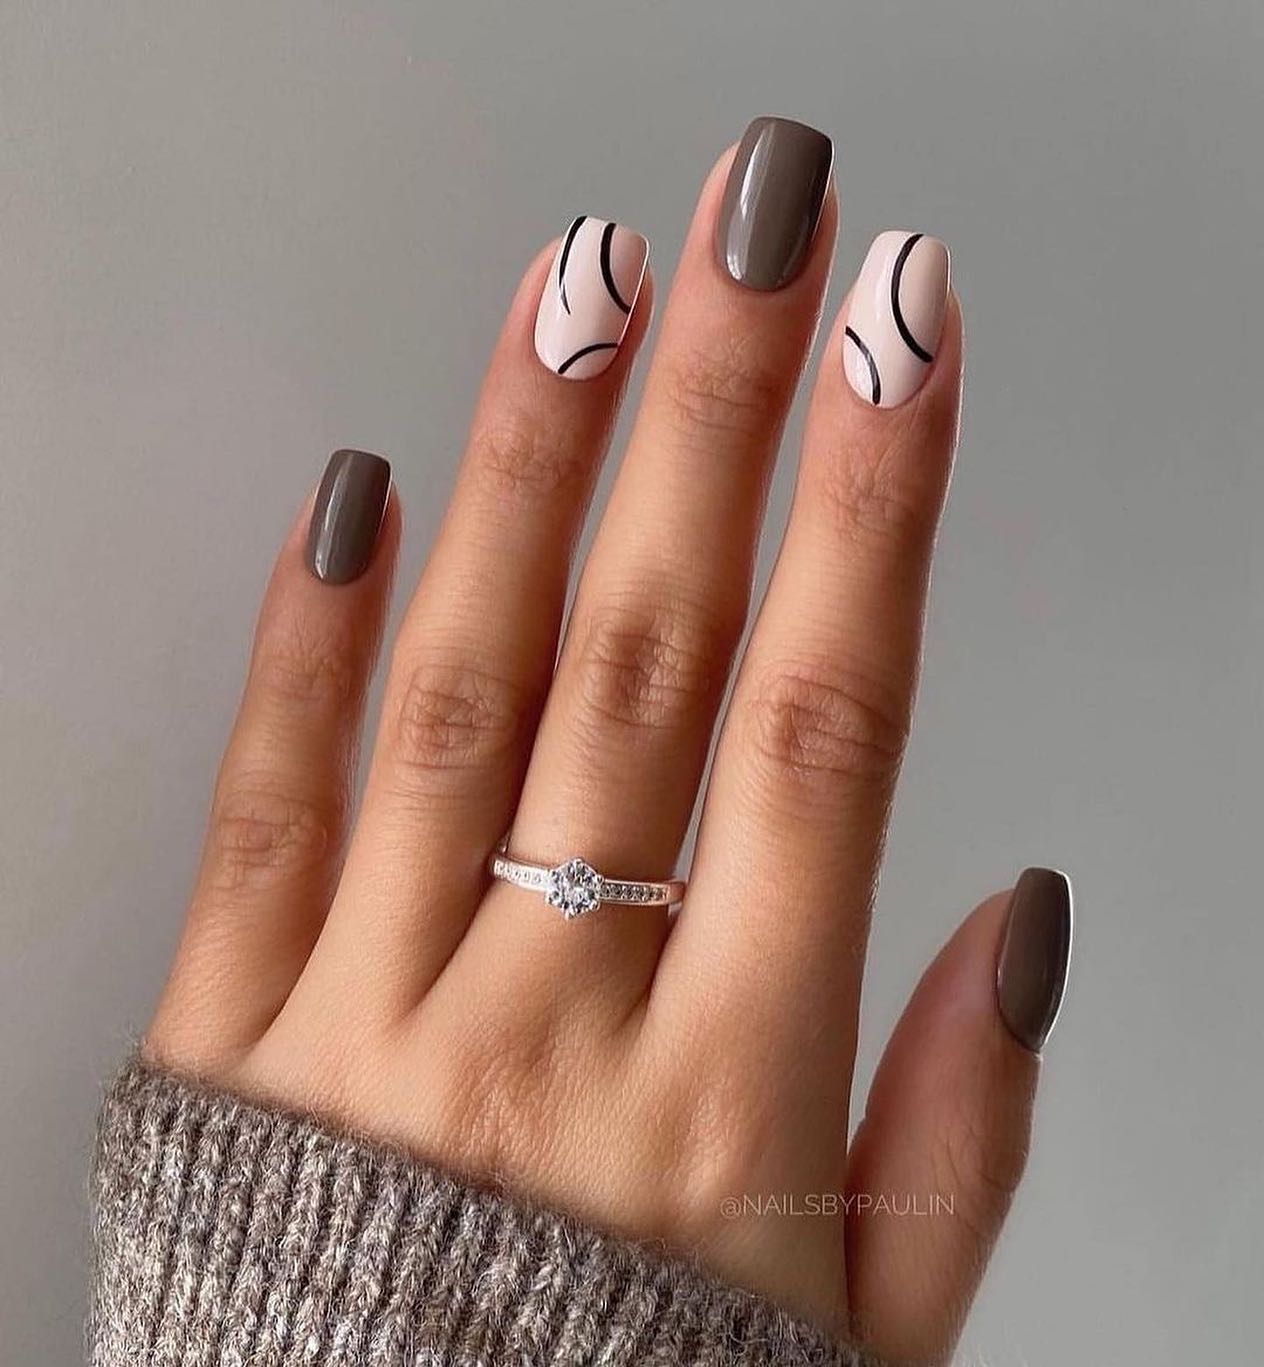 Nail Designs 2023: The Coolest Nail Ideas To Try Now images 2